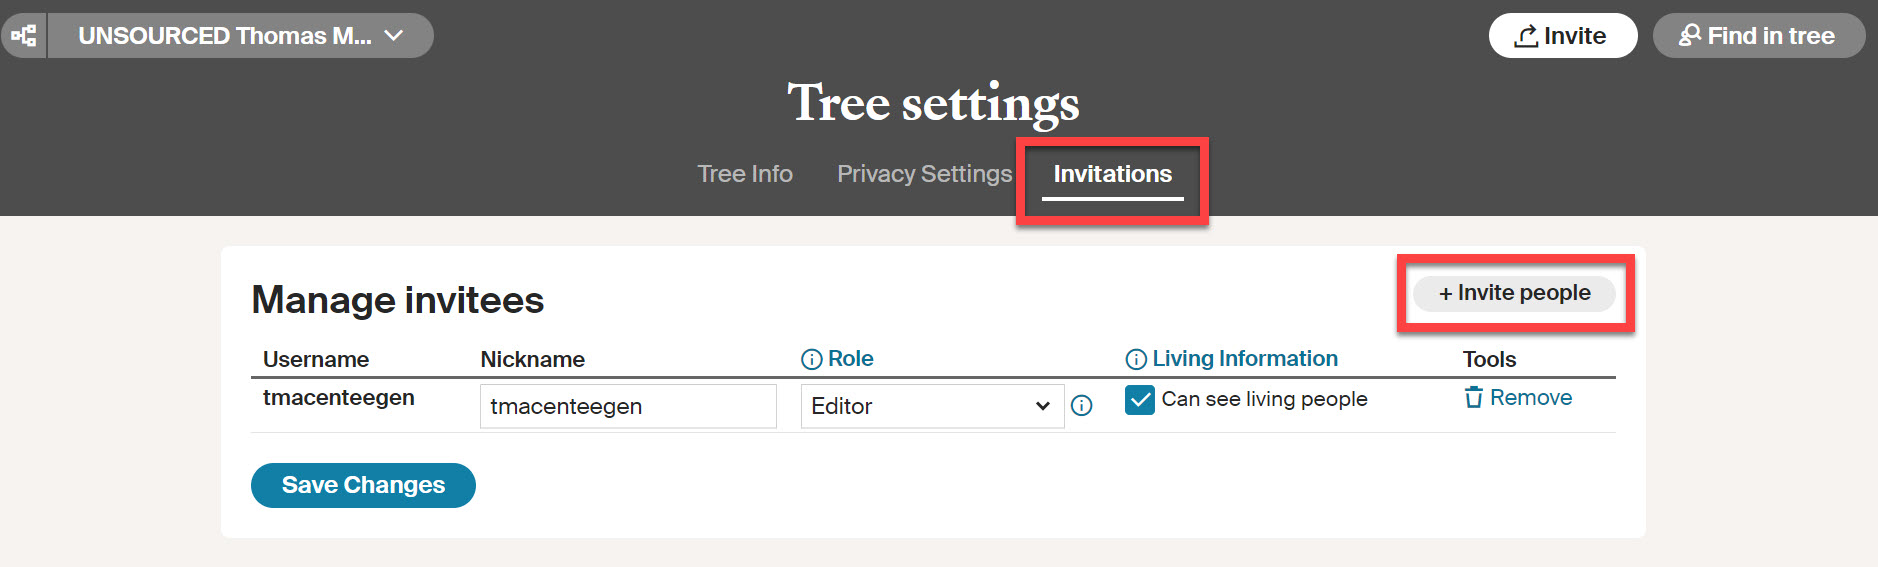 Ancestry Family Trees - How to Invite Others to View or Help Build Your Tree